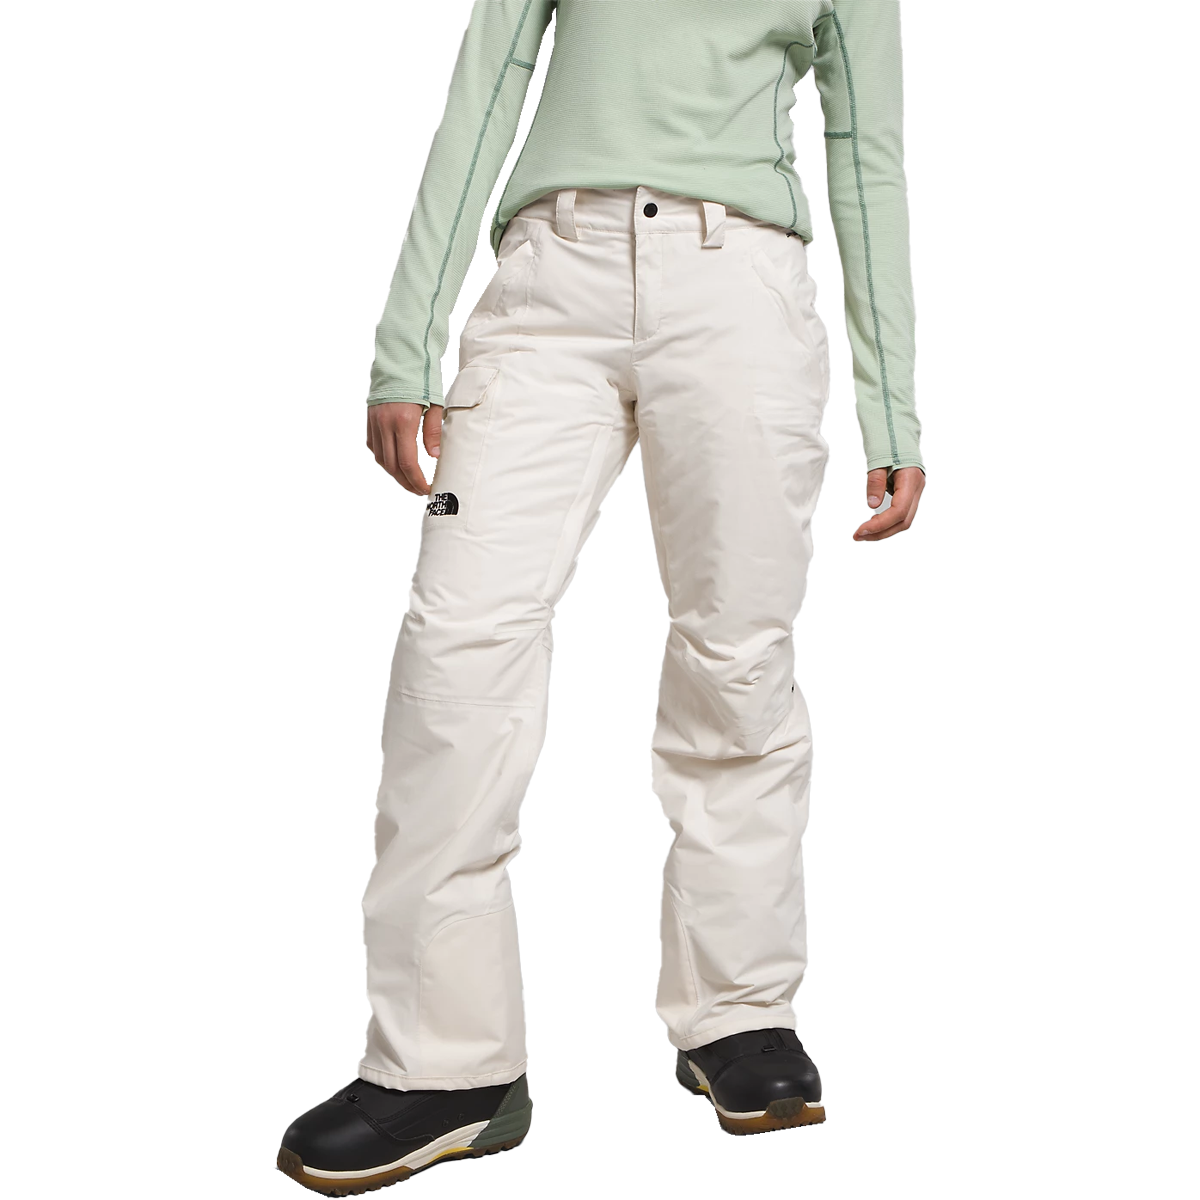 Women's Freedom Insulated Pant - Short alternate view